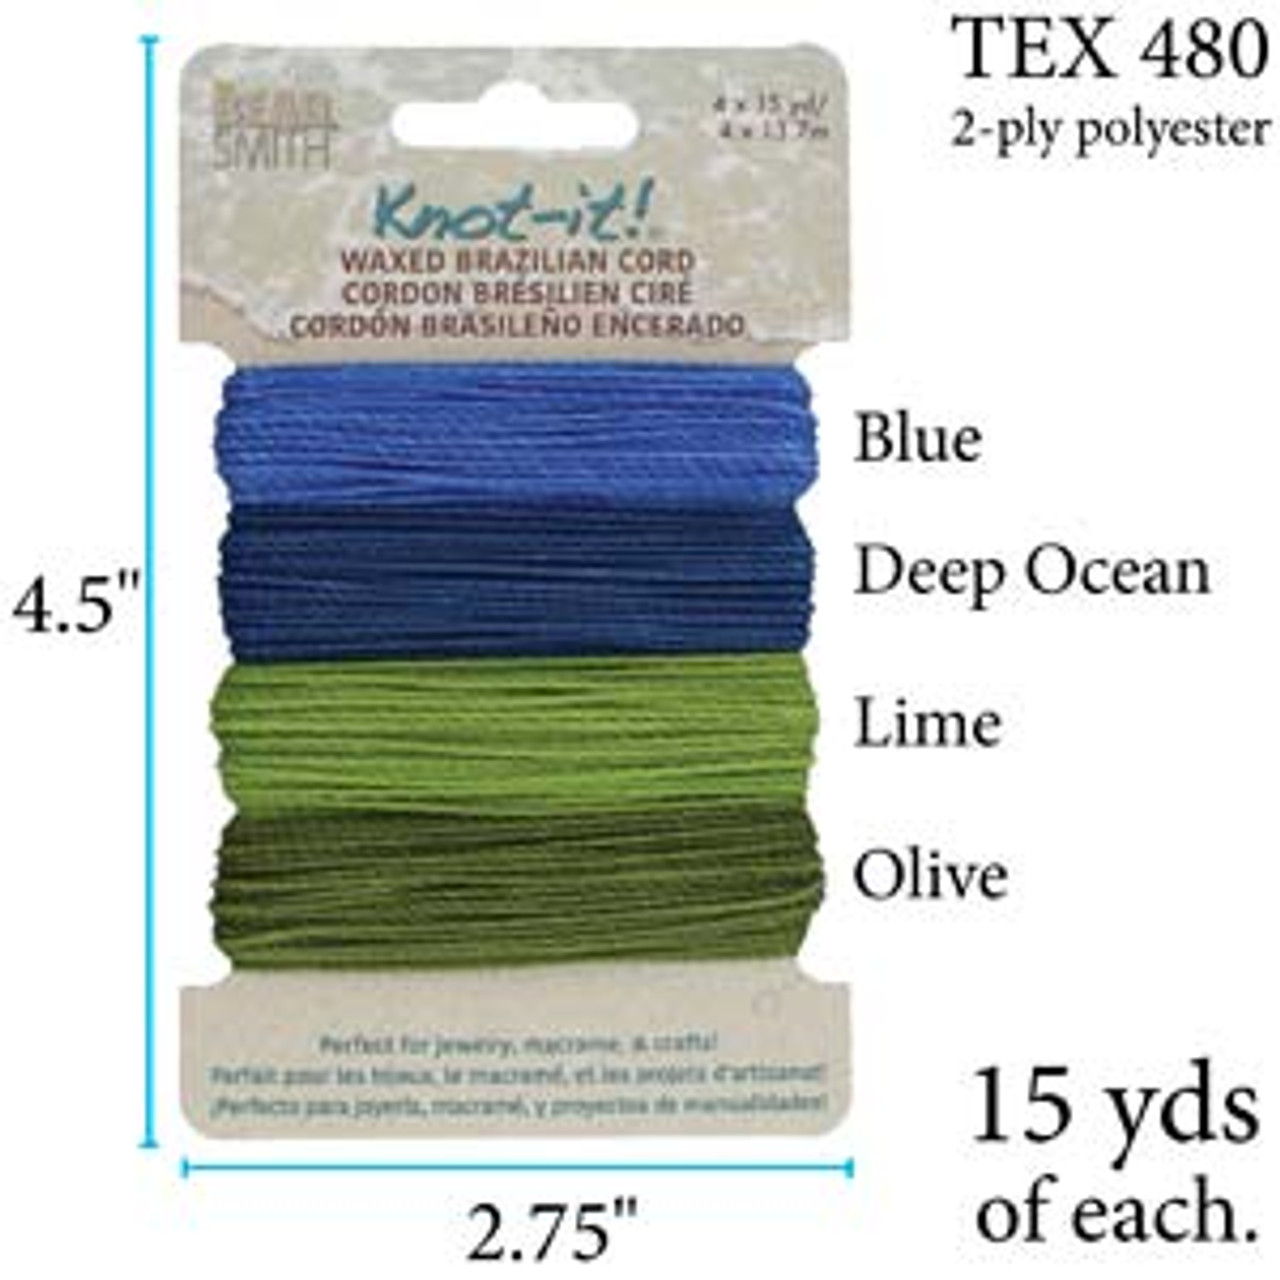 https://cdn11.bigcommerce.com/s-6uq1956/images/stencil/1280x1280/products/31113/53726/PLY04-MIX09-Knot_It_Waxed_Brazilian_Polyester_Cord_HANG_LOOSE_15_Yards-2__10674.1613497135.jpg?c=2